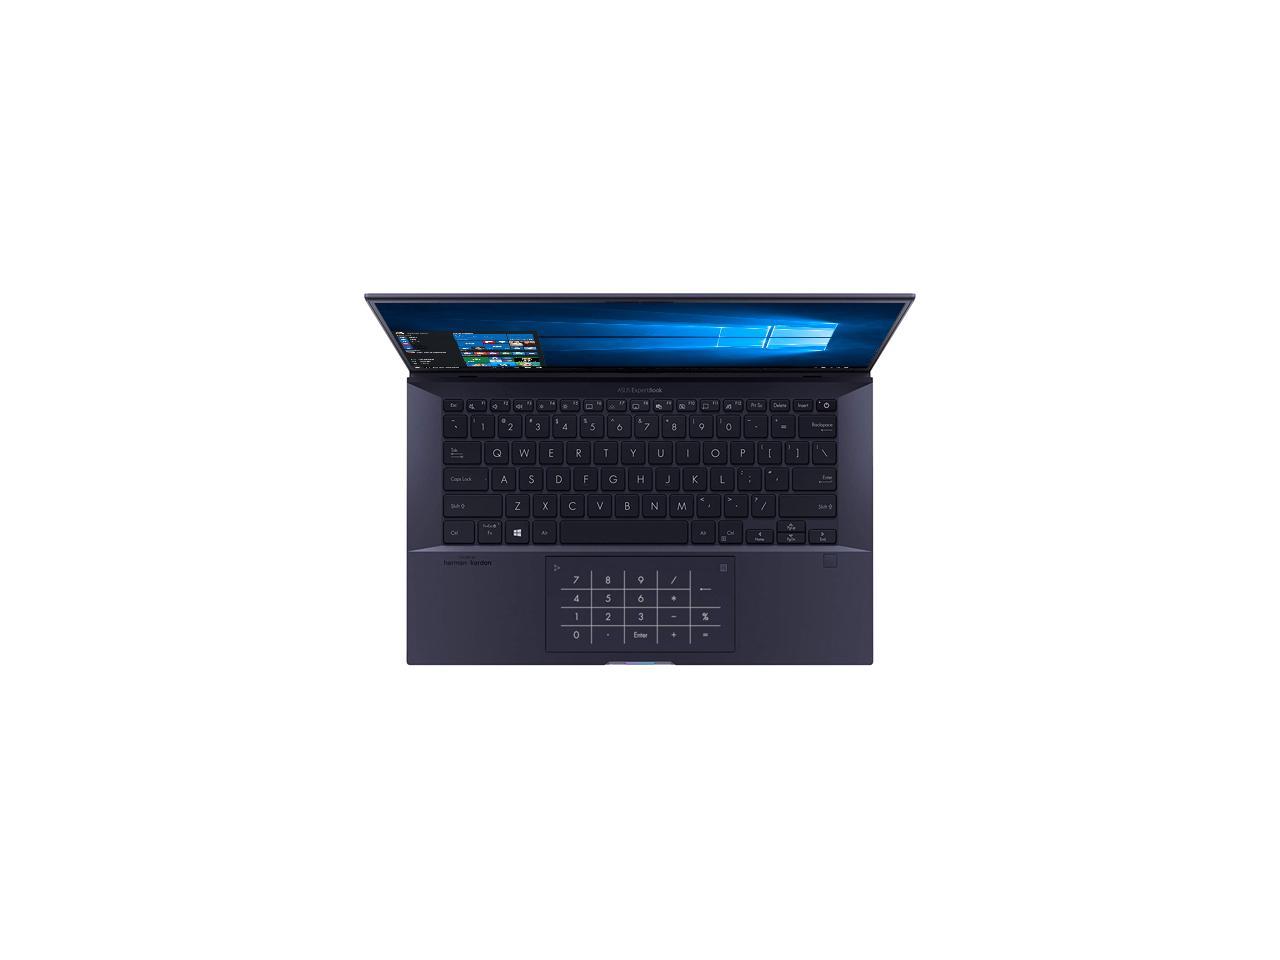 ASUS ExpertBook B9450 Thin and Light Business Laptop, 14" FHD, Intel Core i7-10510U Processor, 512 GB PCIe SSD, 16 GB RAM, Windows 10 Pro, Up to 24 Hrs Battery Life, Sleeve, B9450FA-XS74